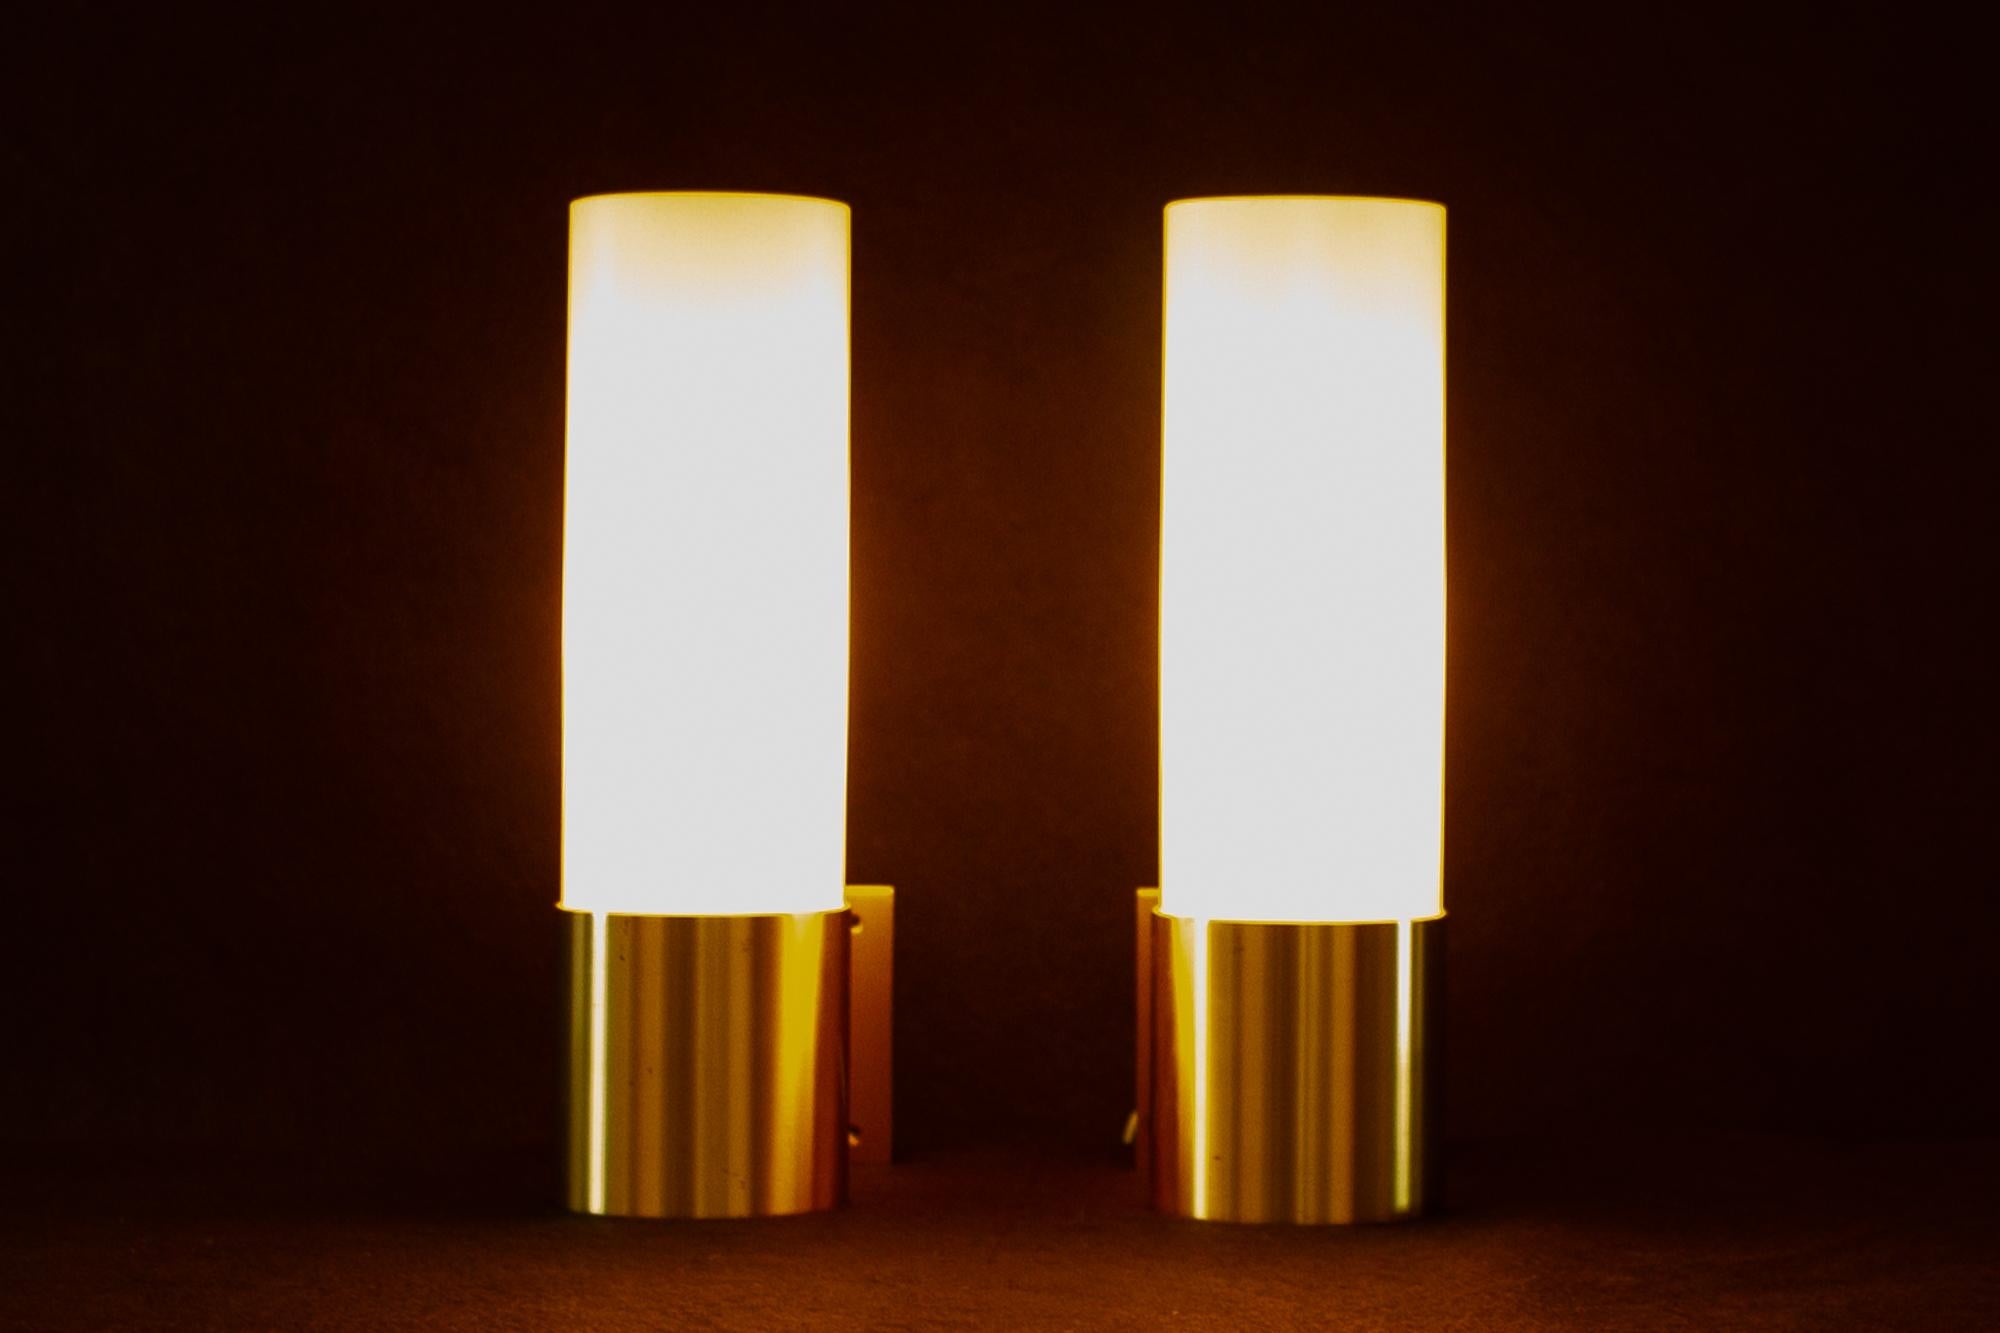 Pair of Danish sconces by Fog & Mørup, 1960s.
Set of two matching wall light in brass with hand blown opal glass shades designed by Professor Jørgen Bo and made by Danish lighting manufacturer Fog og Mørup in the 1960s. E27 socket. Shade has a